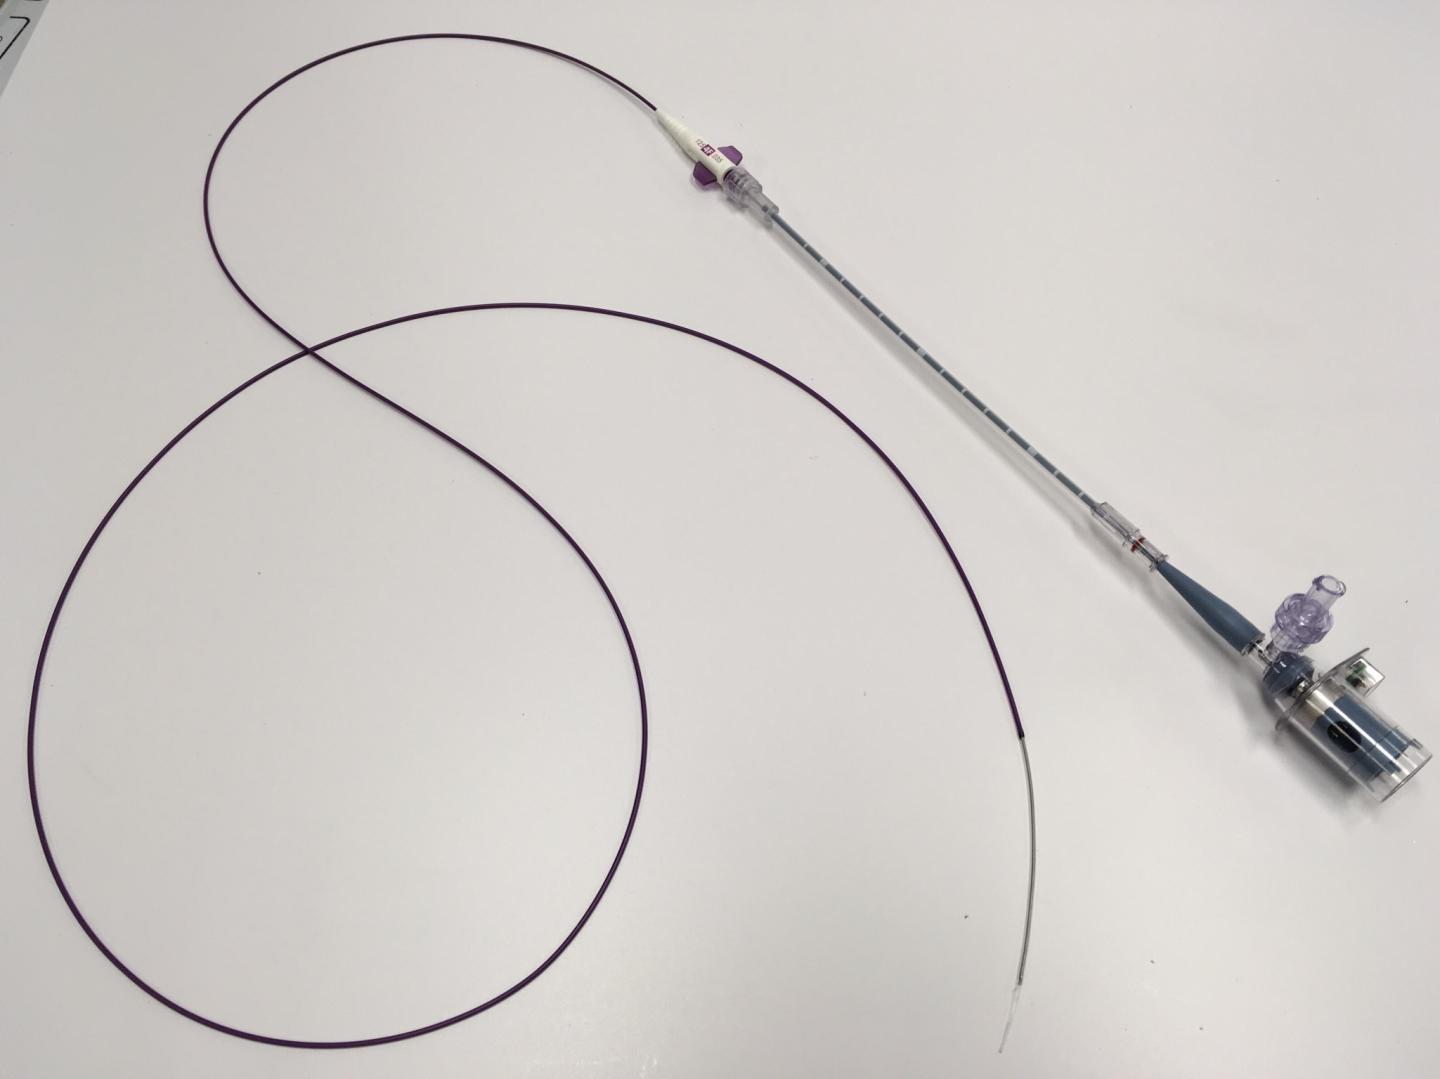 New Cardiac Catheter Combines Light and Ultrasound to Measure Plaques